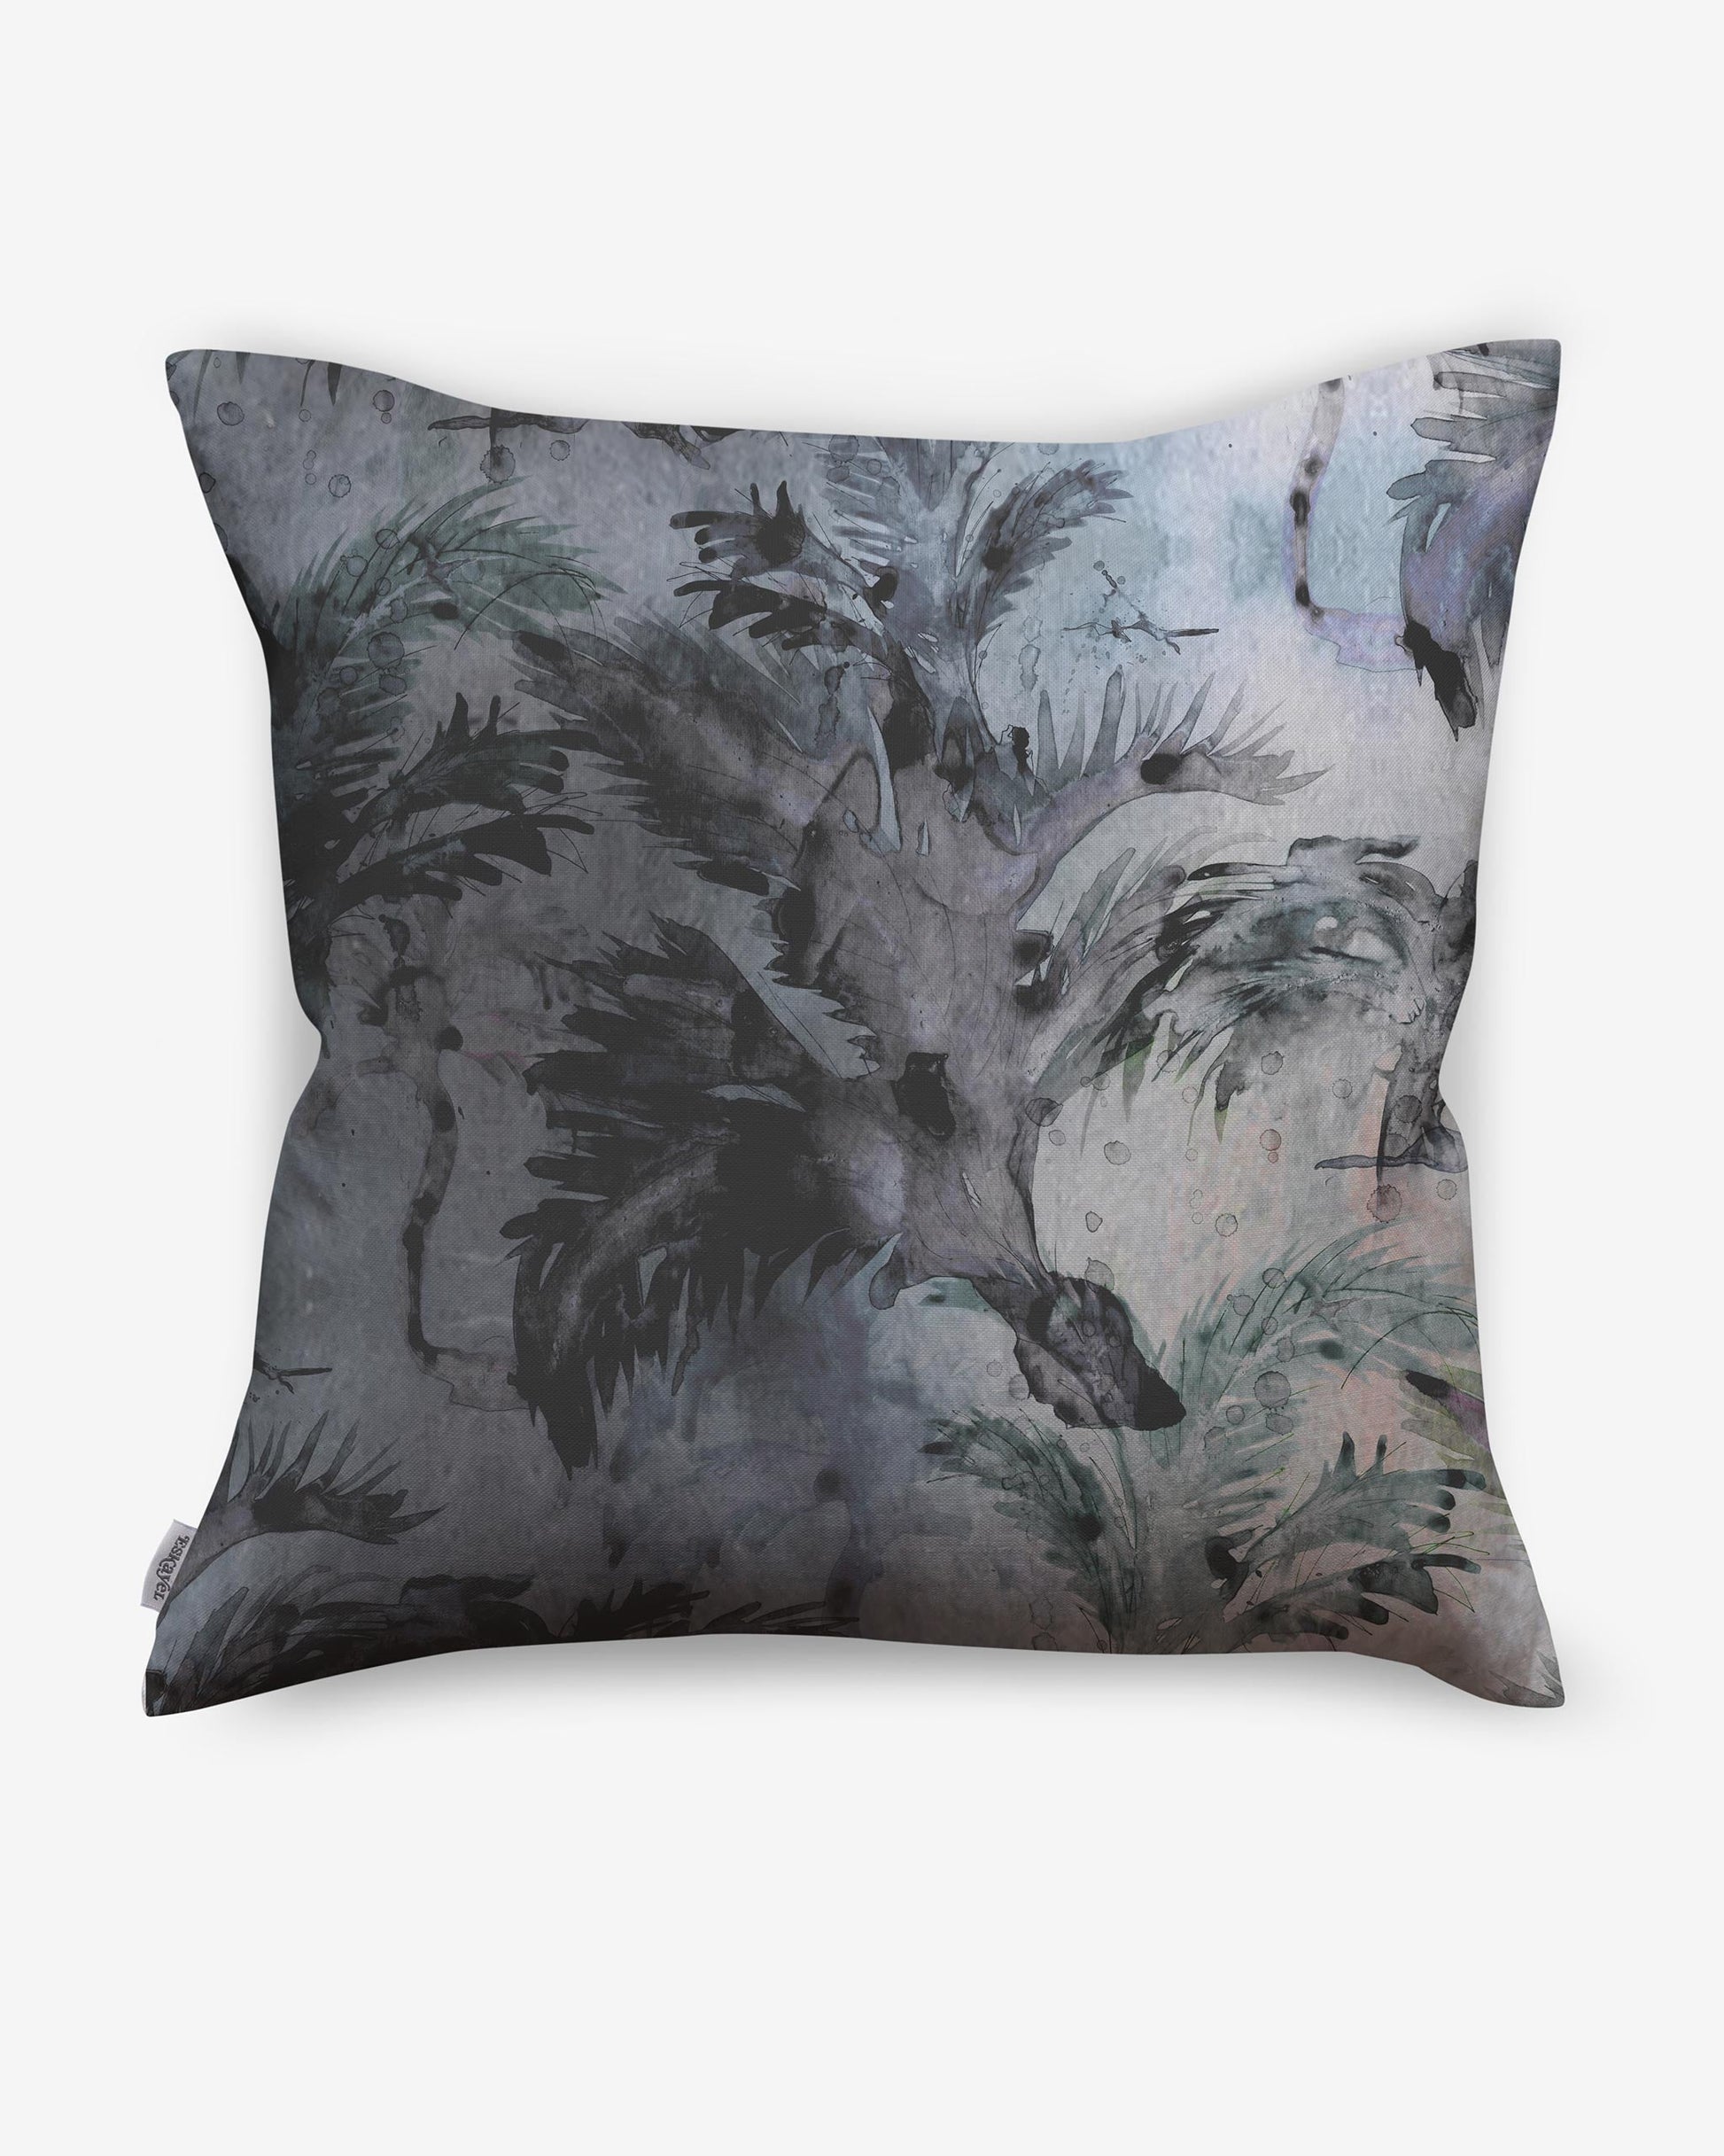 A pillow with a black and white Cocos Pillow Dove painting on it